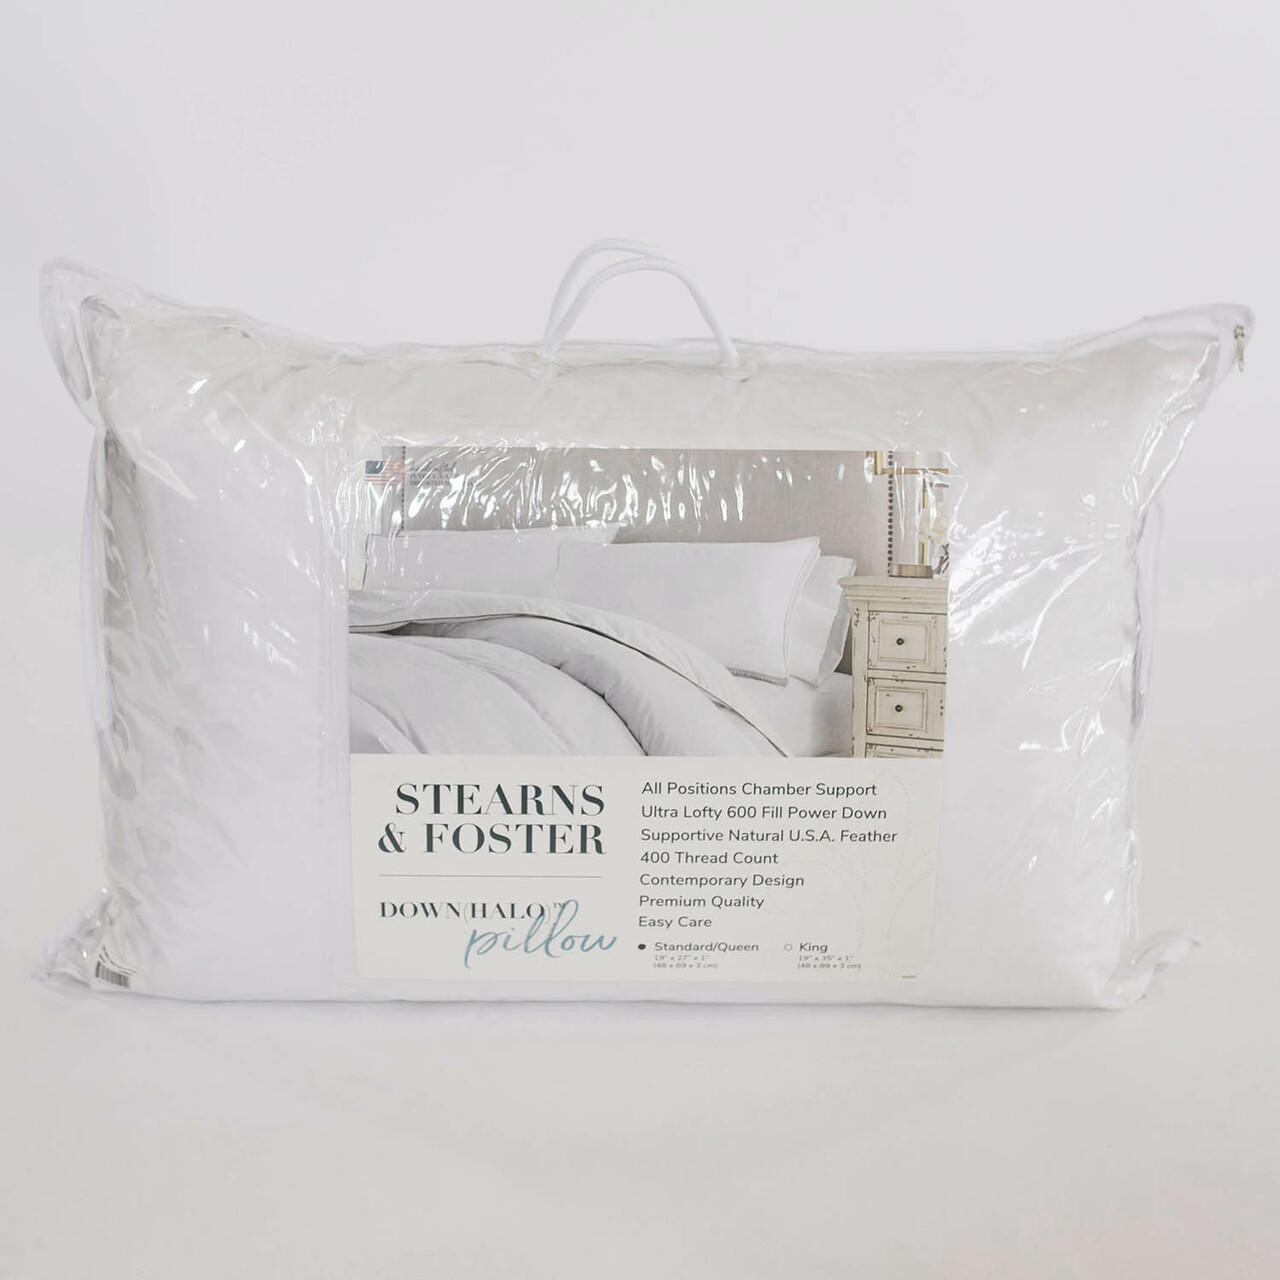 https://cdn11.bigcommerce.com/s-j8lceuq/products/564/images/4338/stearns-and-foster-stearns-and-foster-downhalo-all-positions-pillow-rds-certified__68347.1628147844.1280.1280.jpg?c=2